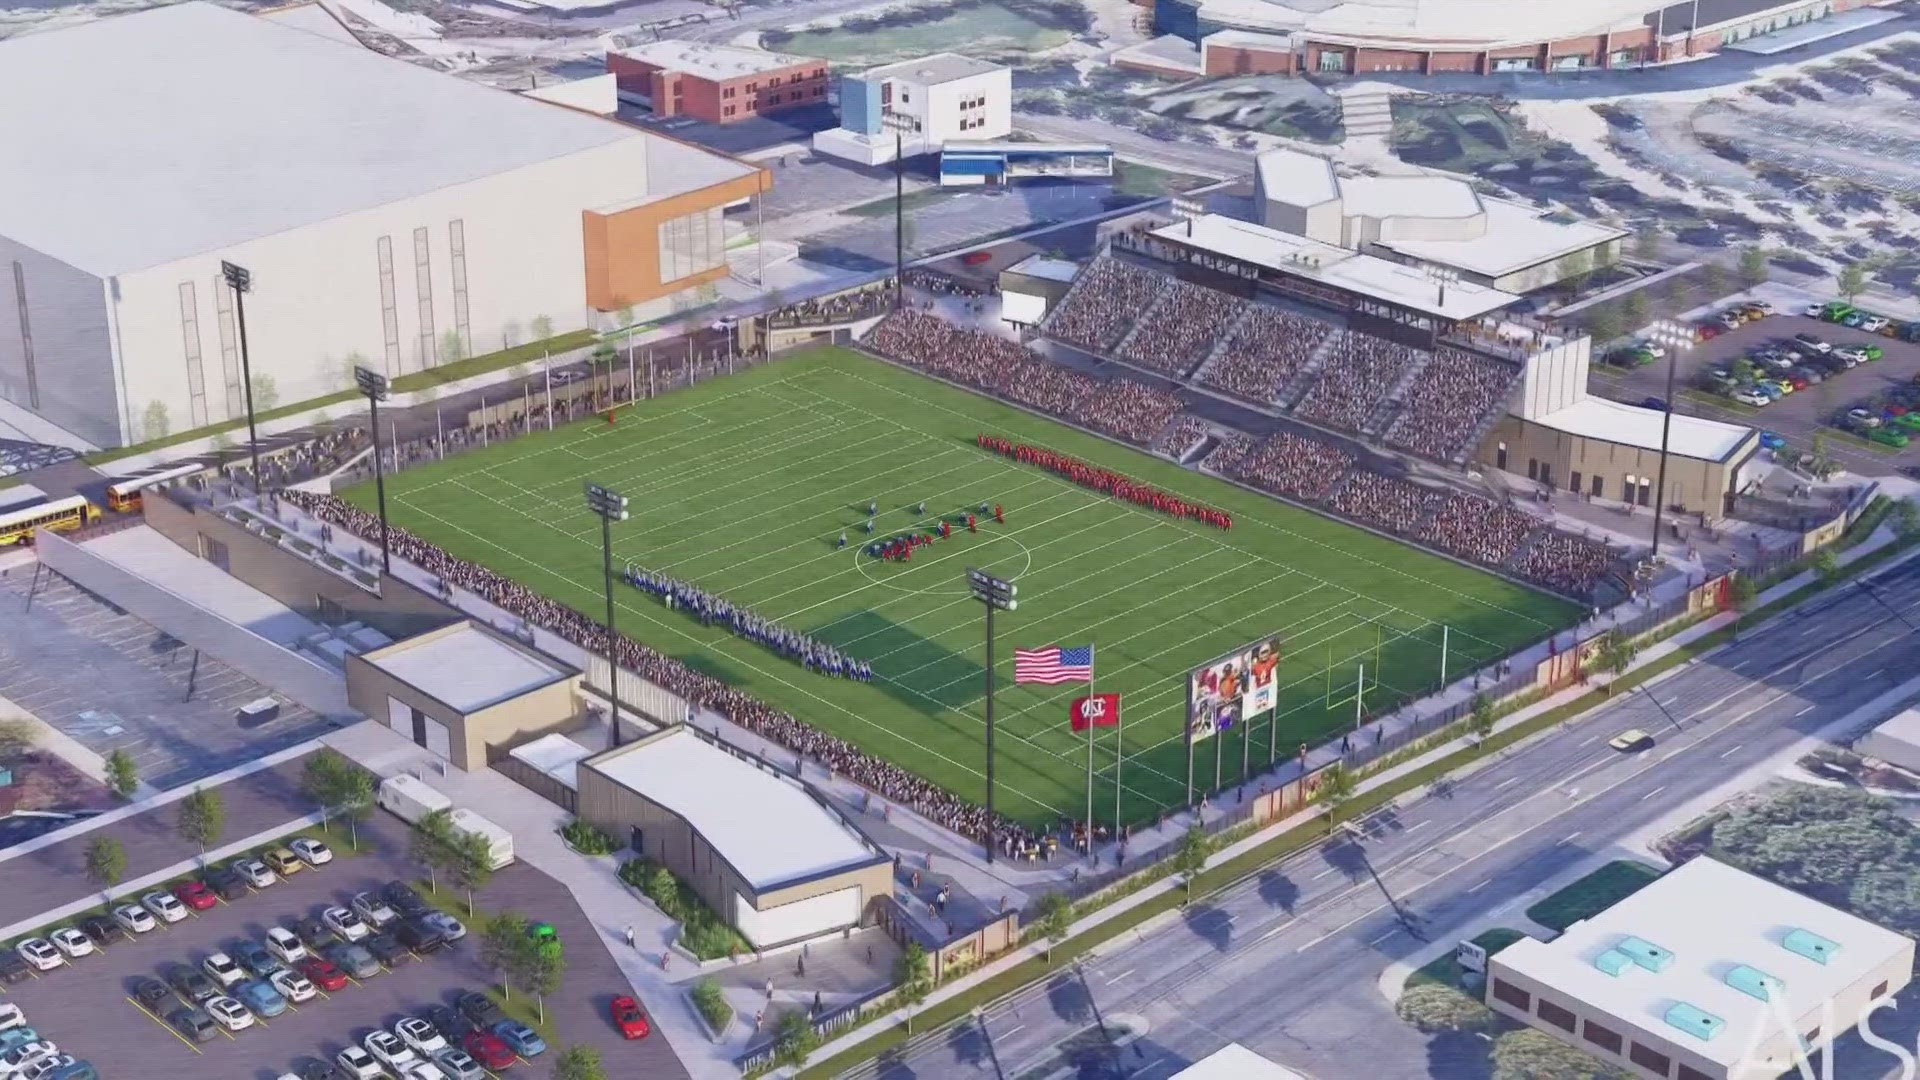 ONE Spokane Stadium, which is set to open this fall, is planning a number of grand opening events throughout the month of September.